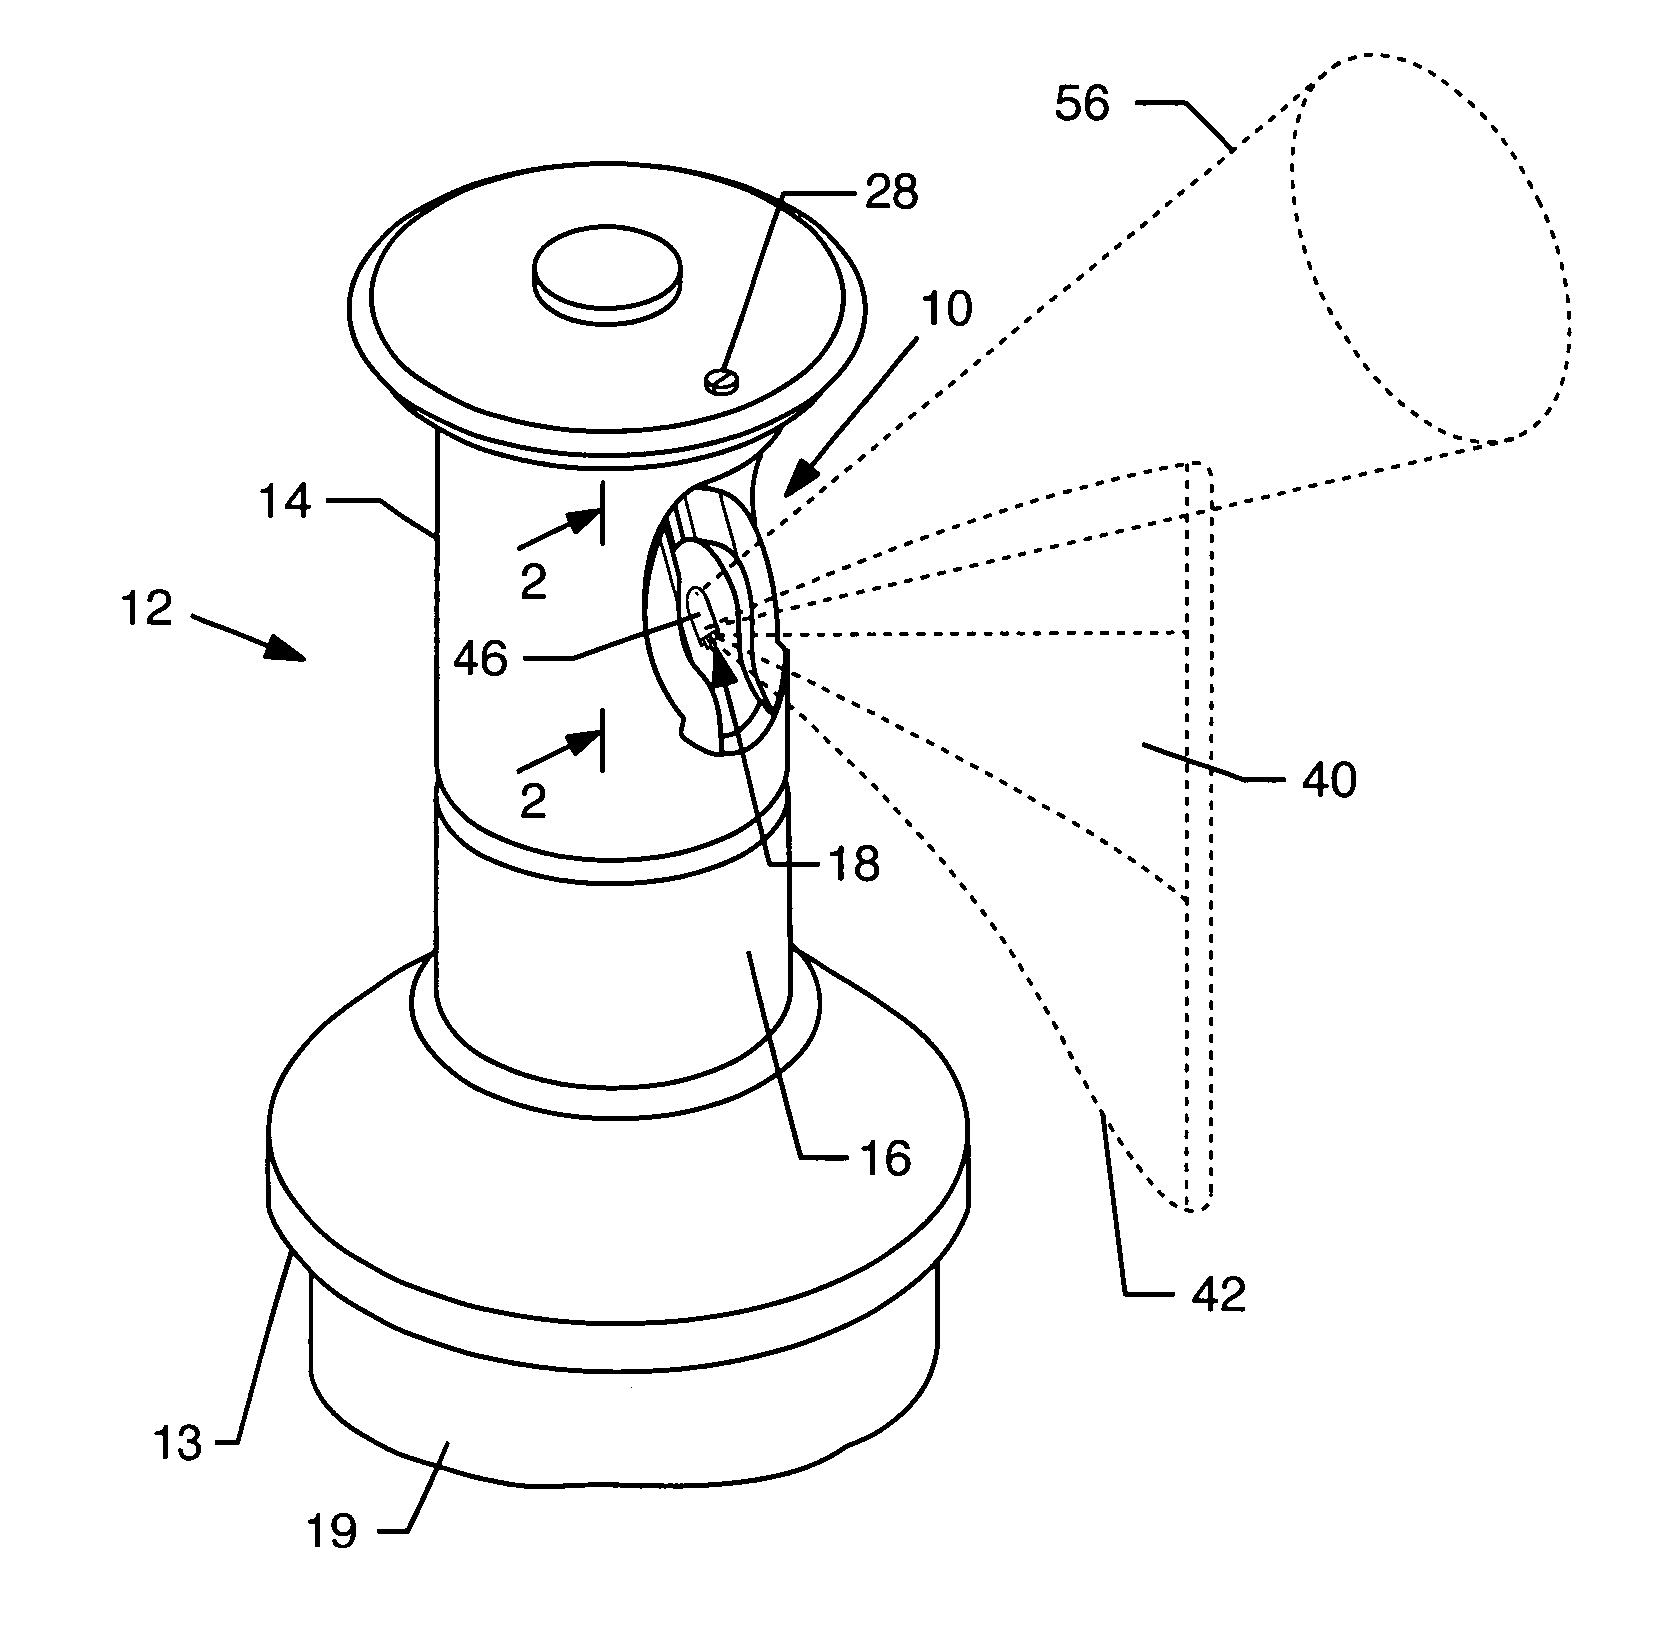 Irrigation sprinkler nozzle with enhanced close-in water distribution